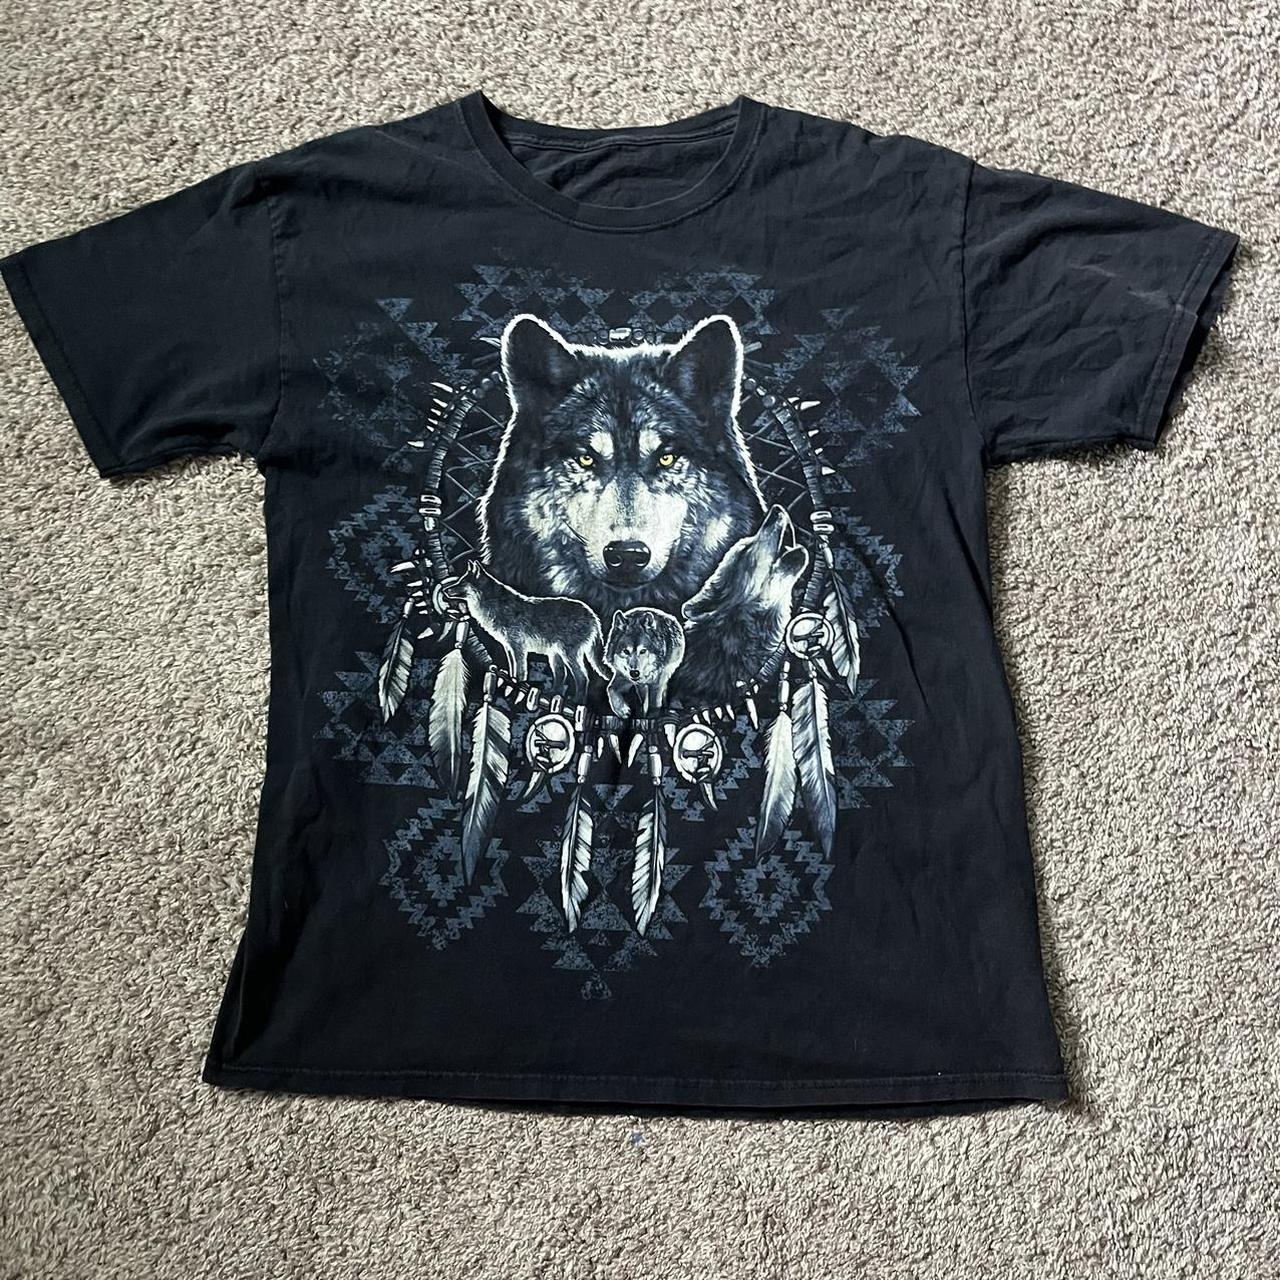 Super sick vintage style wolf tee, dm me with any... - Depop